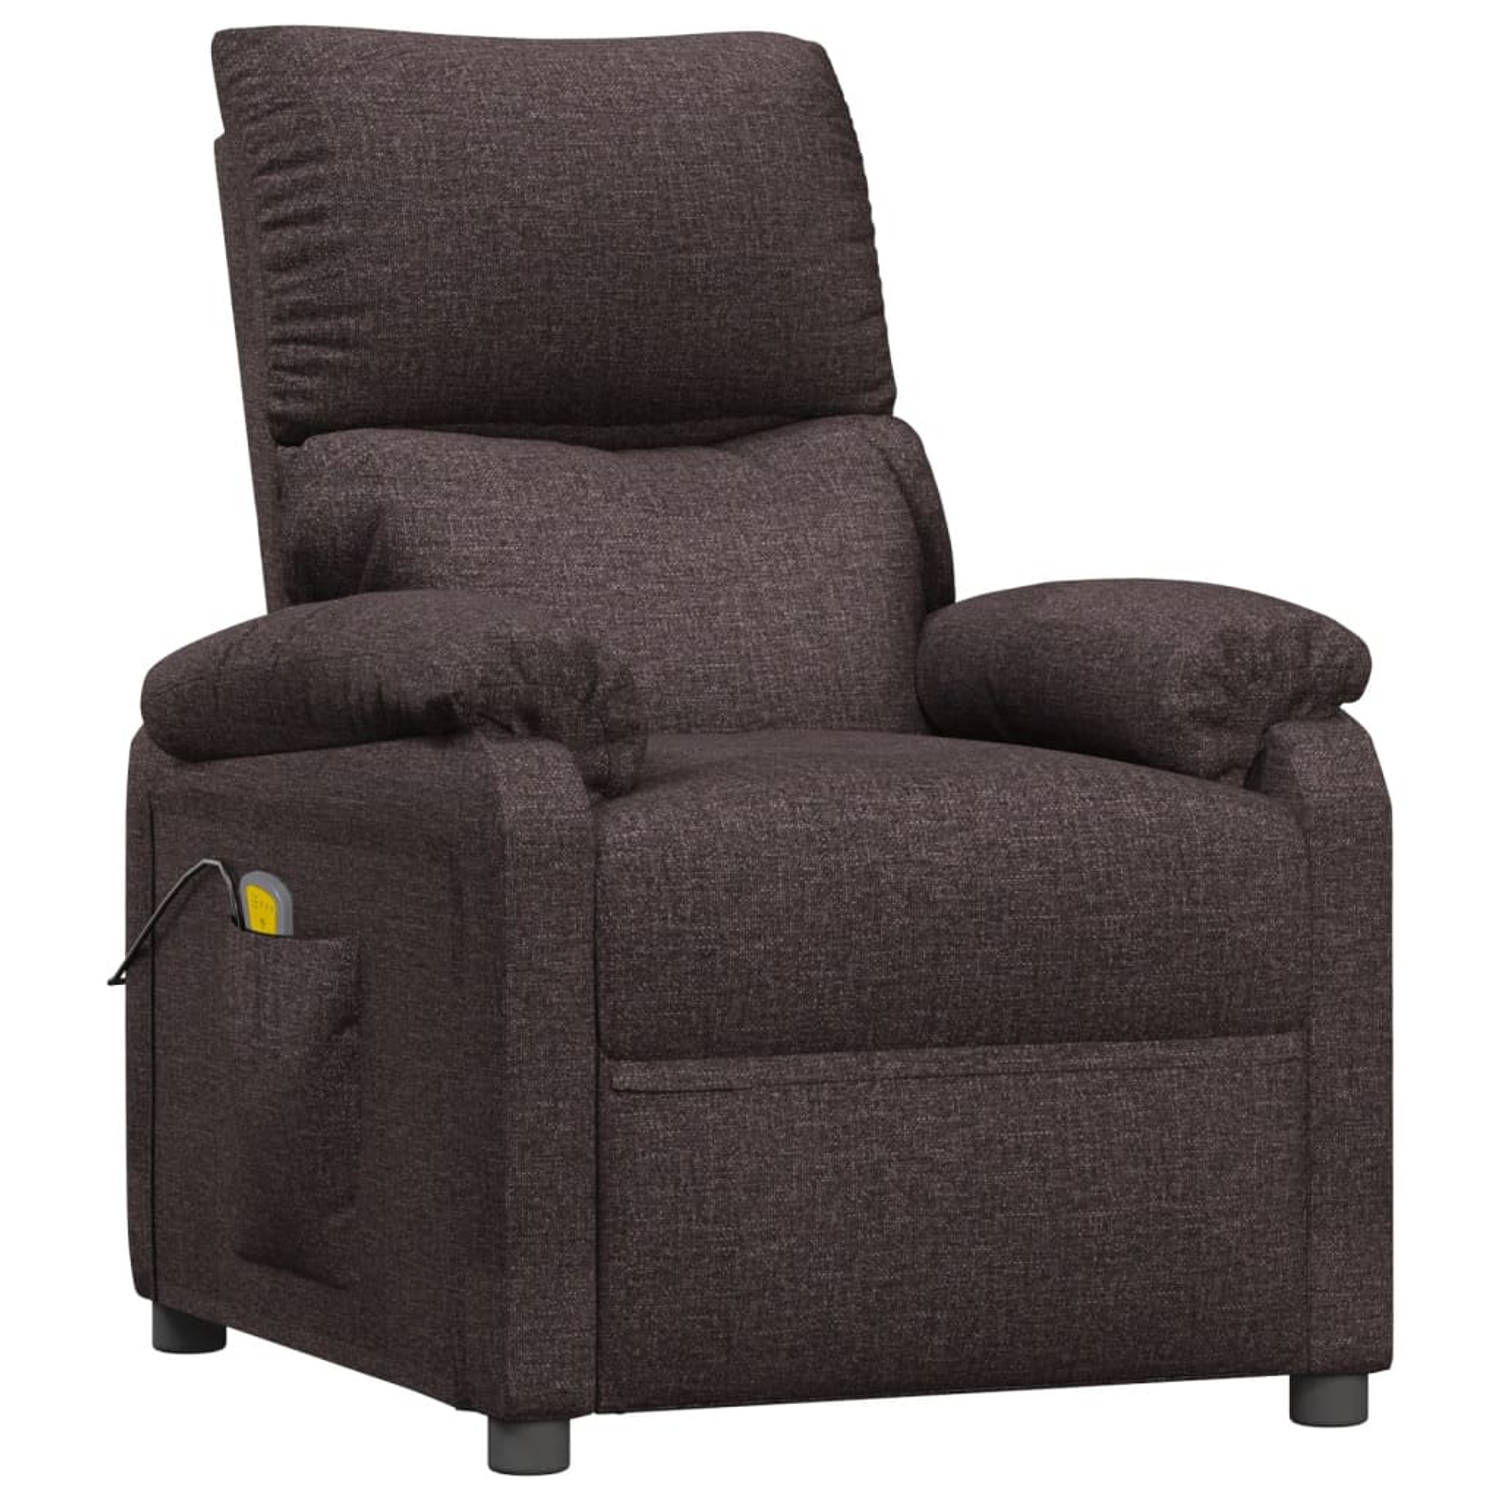 The Living Store Massagestoel stof donkerbruin - Fauteuil